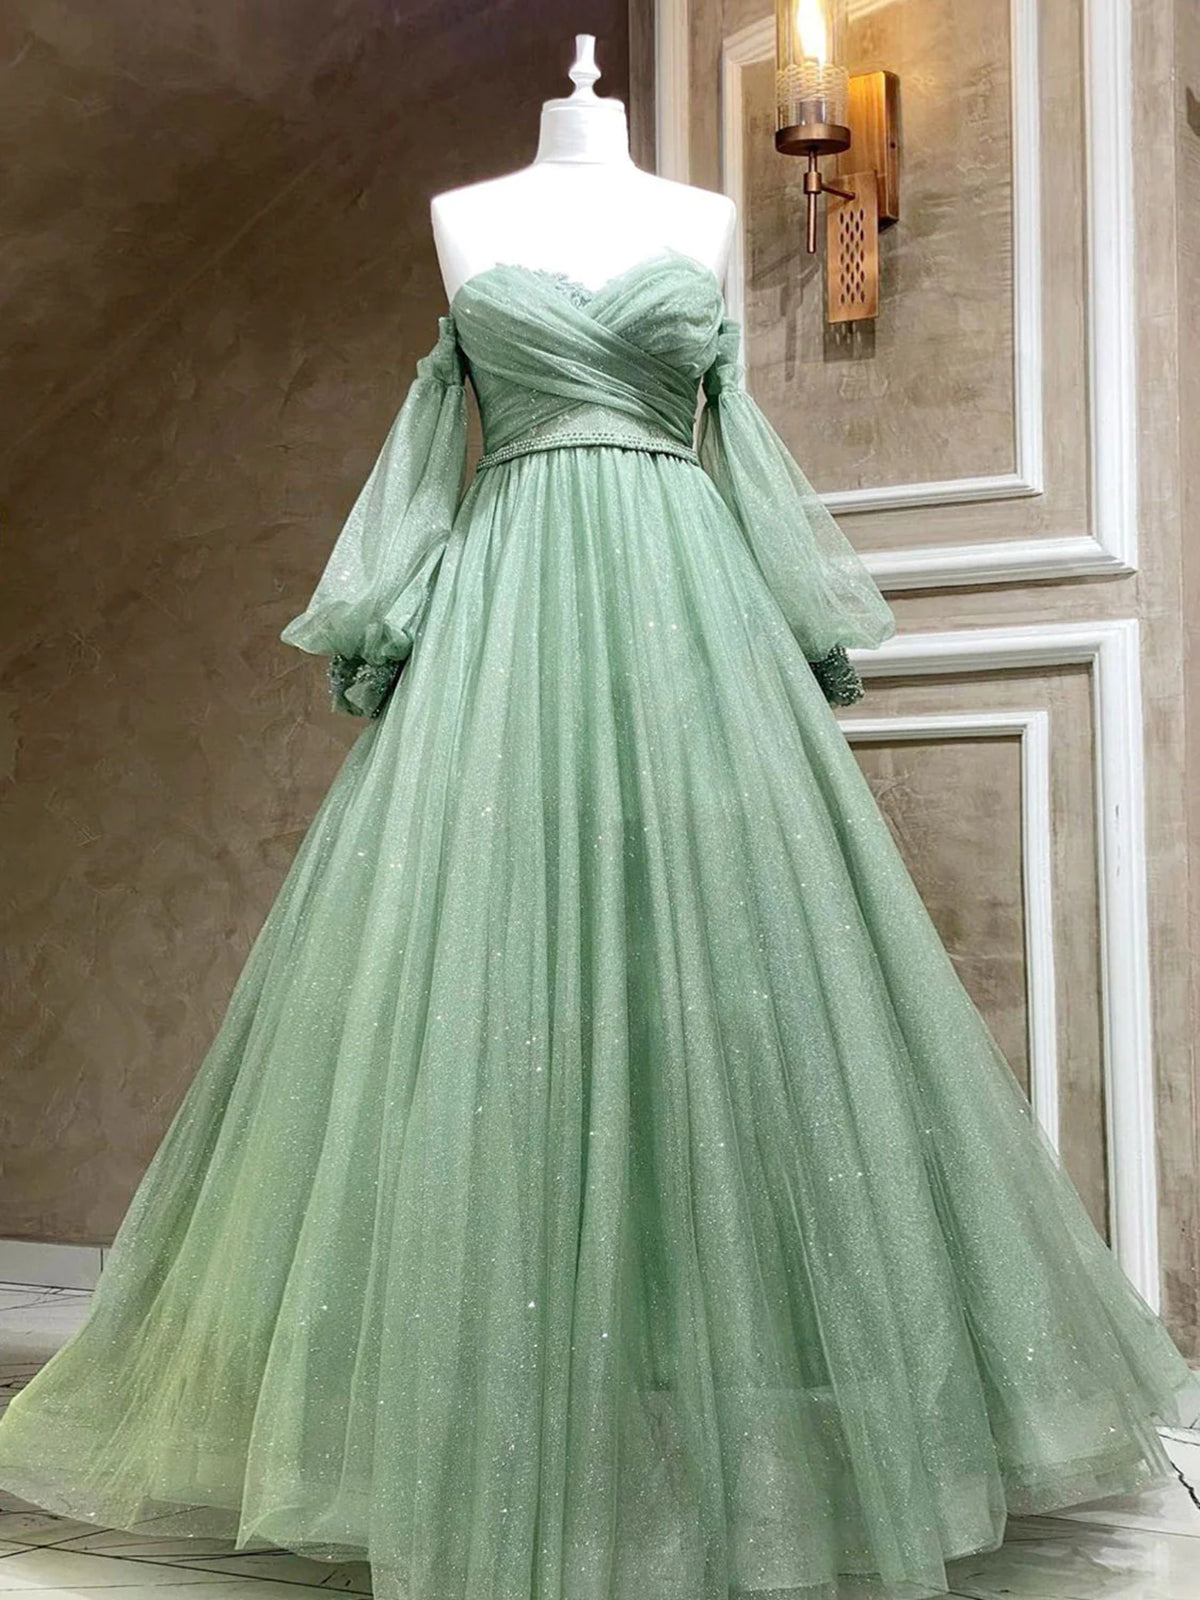 A Line Sweetheart Neck Long Sleeves Green Tulle Long Corset Prom Dress, Long Green Corset Formal Evening Dress outfit, Bridesmaid Dress Purple